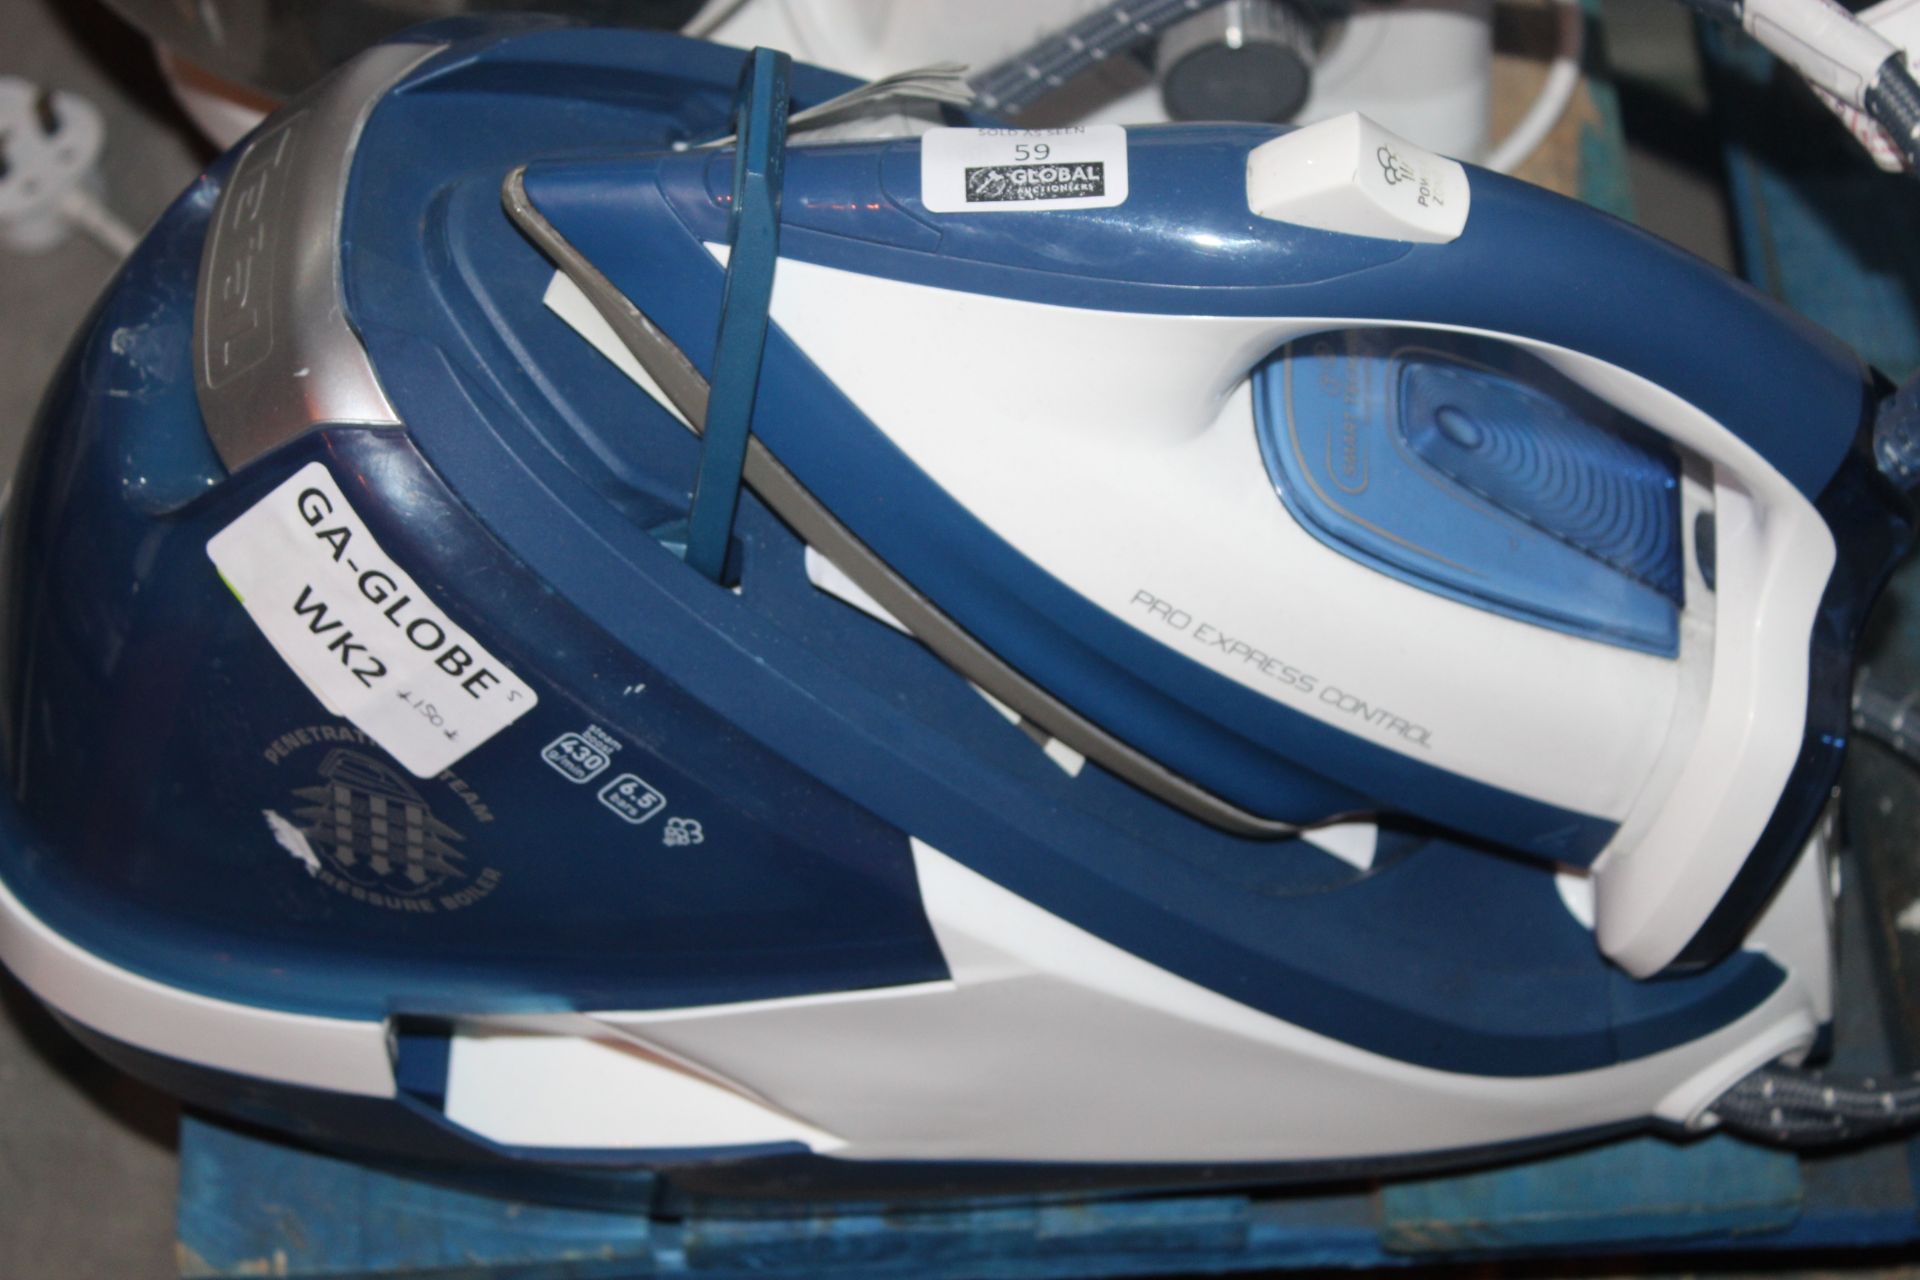 Unboxed Tefal Pro Express Control Iron RRP £150 (Untested/Customer Returns)